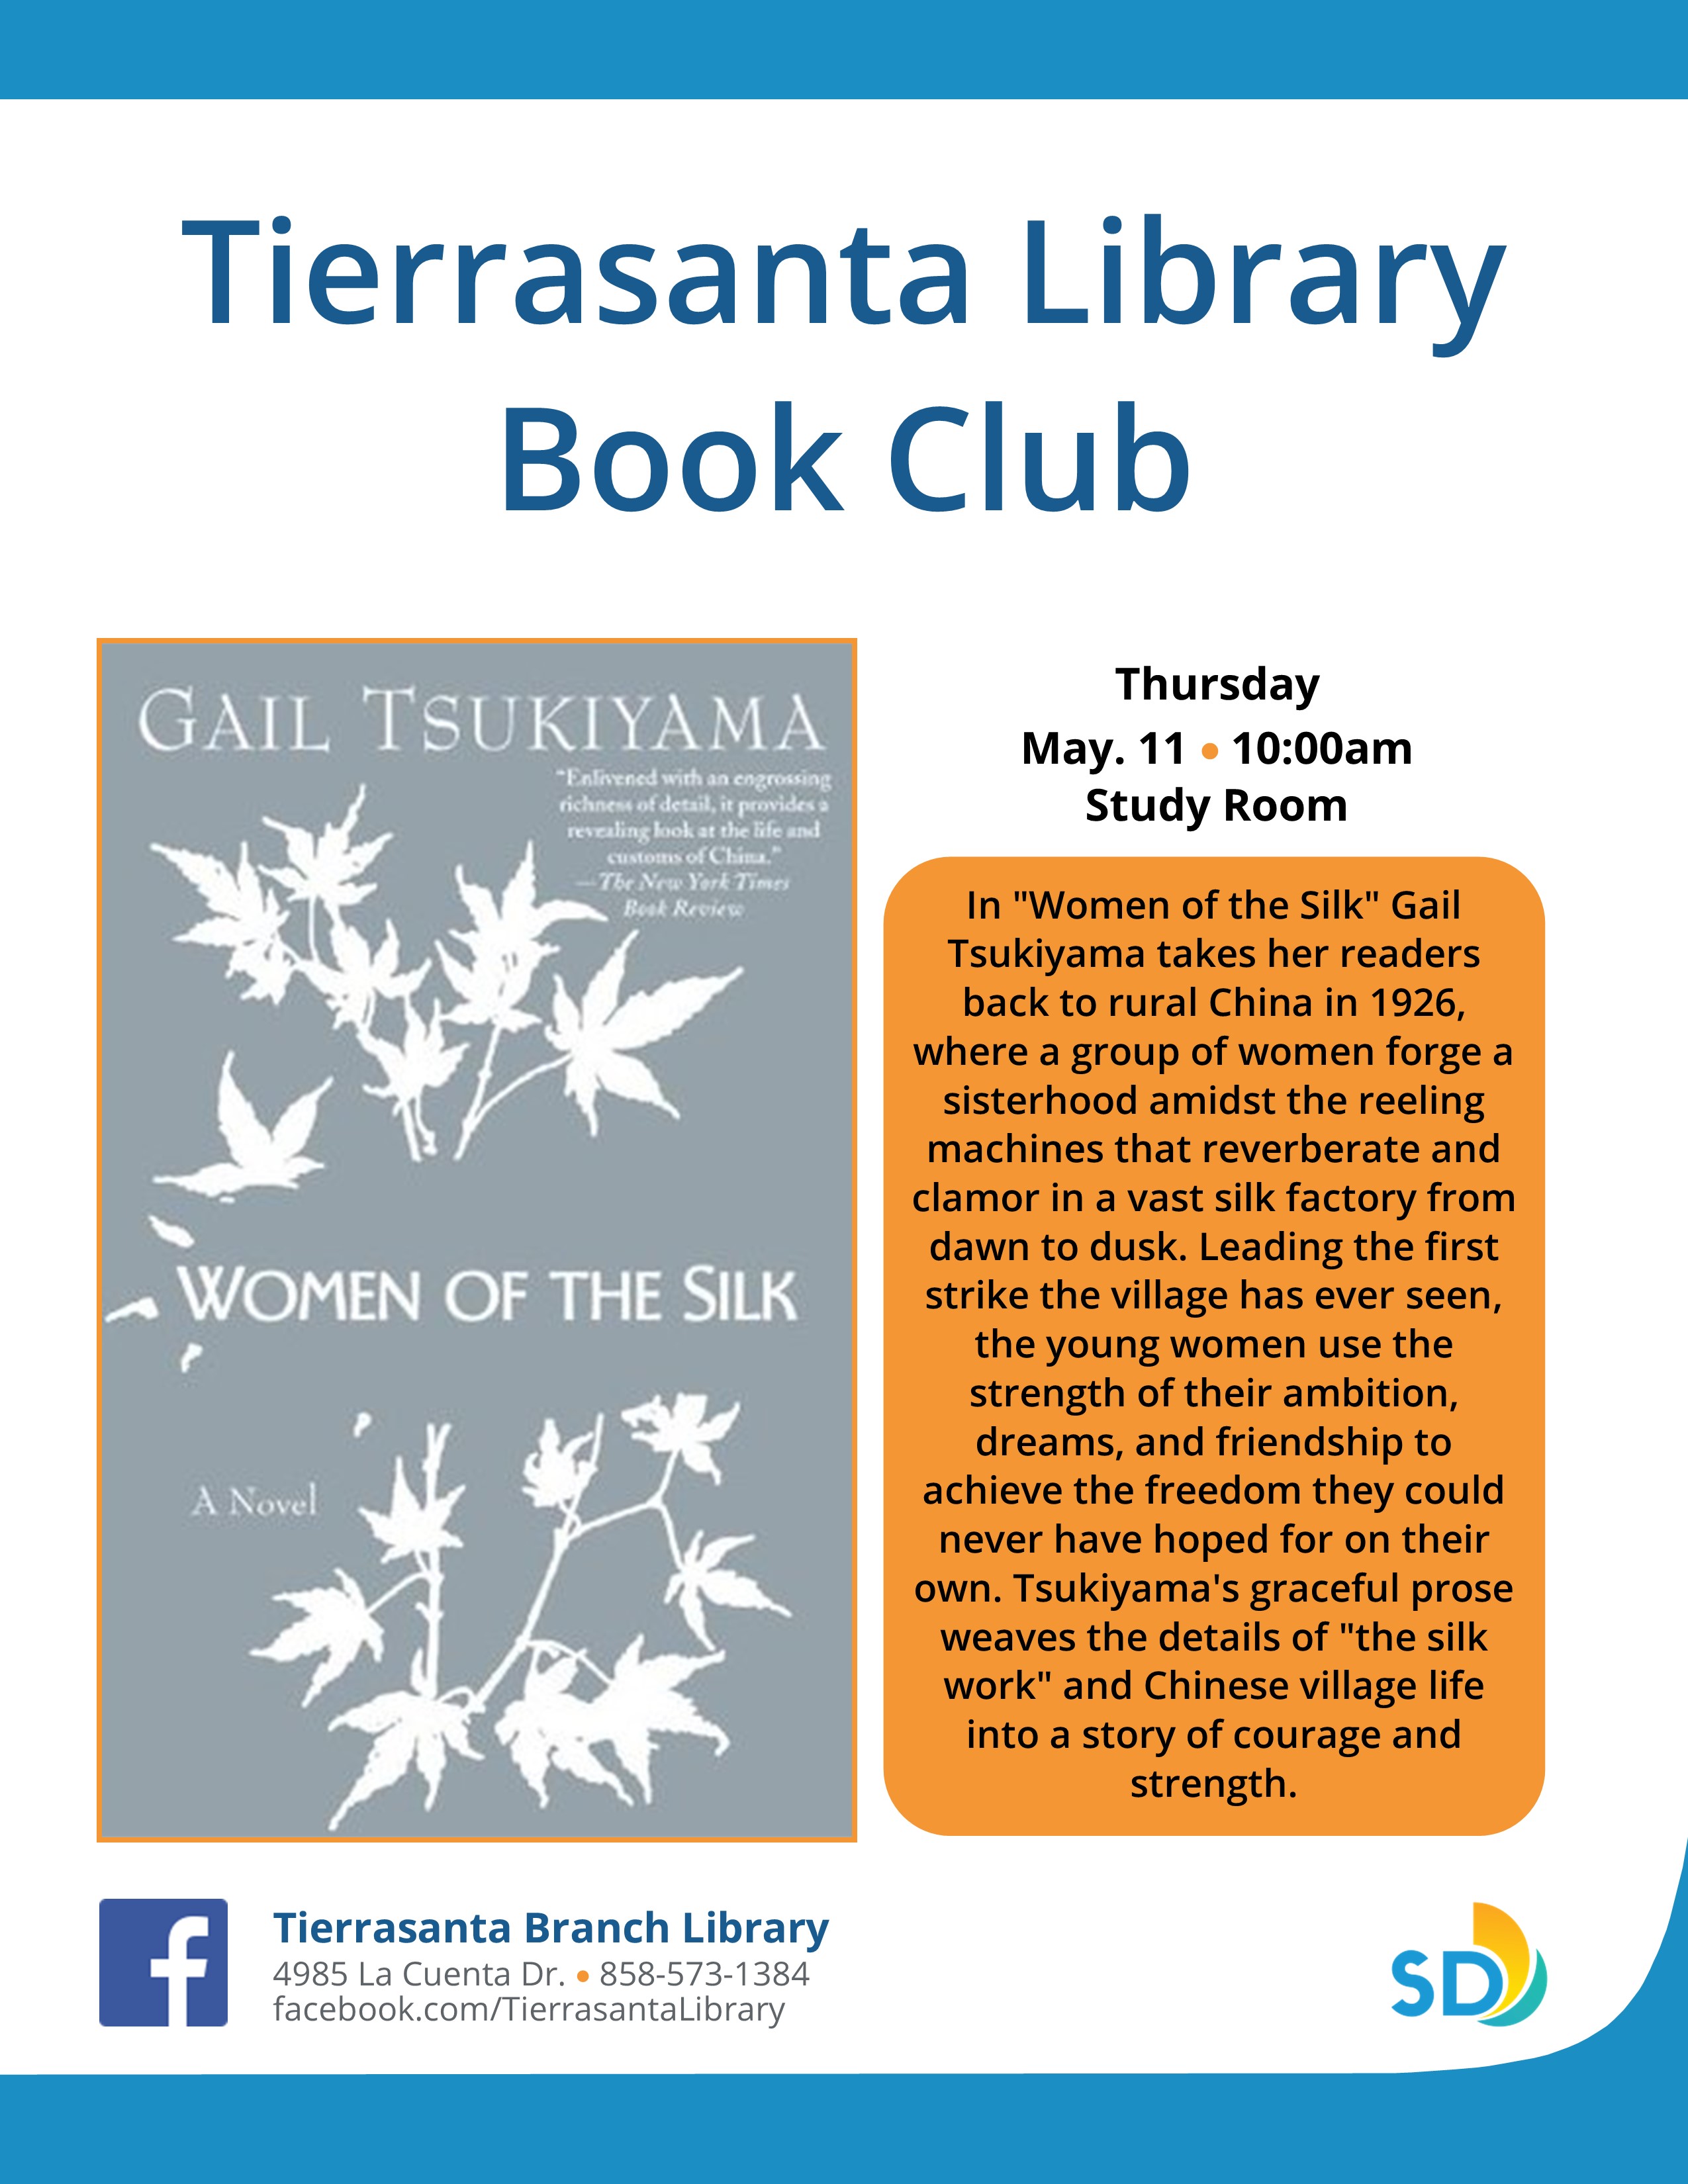 Flyer with a gray book cover with the image of white leaves on branches